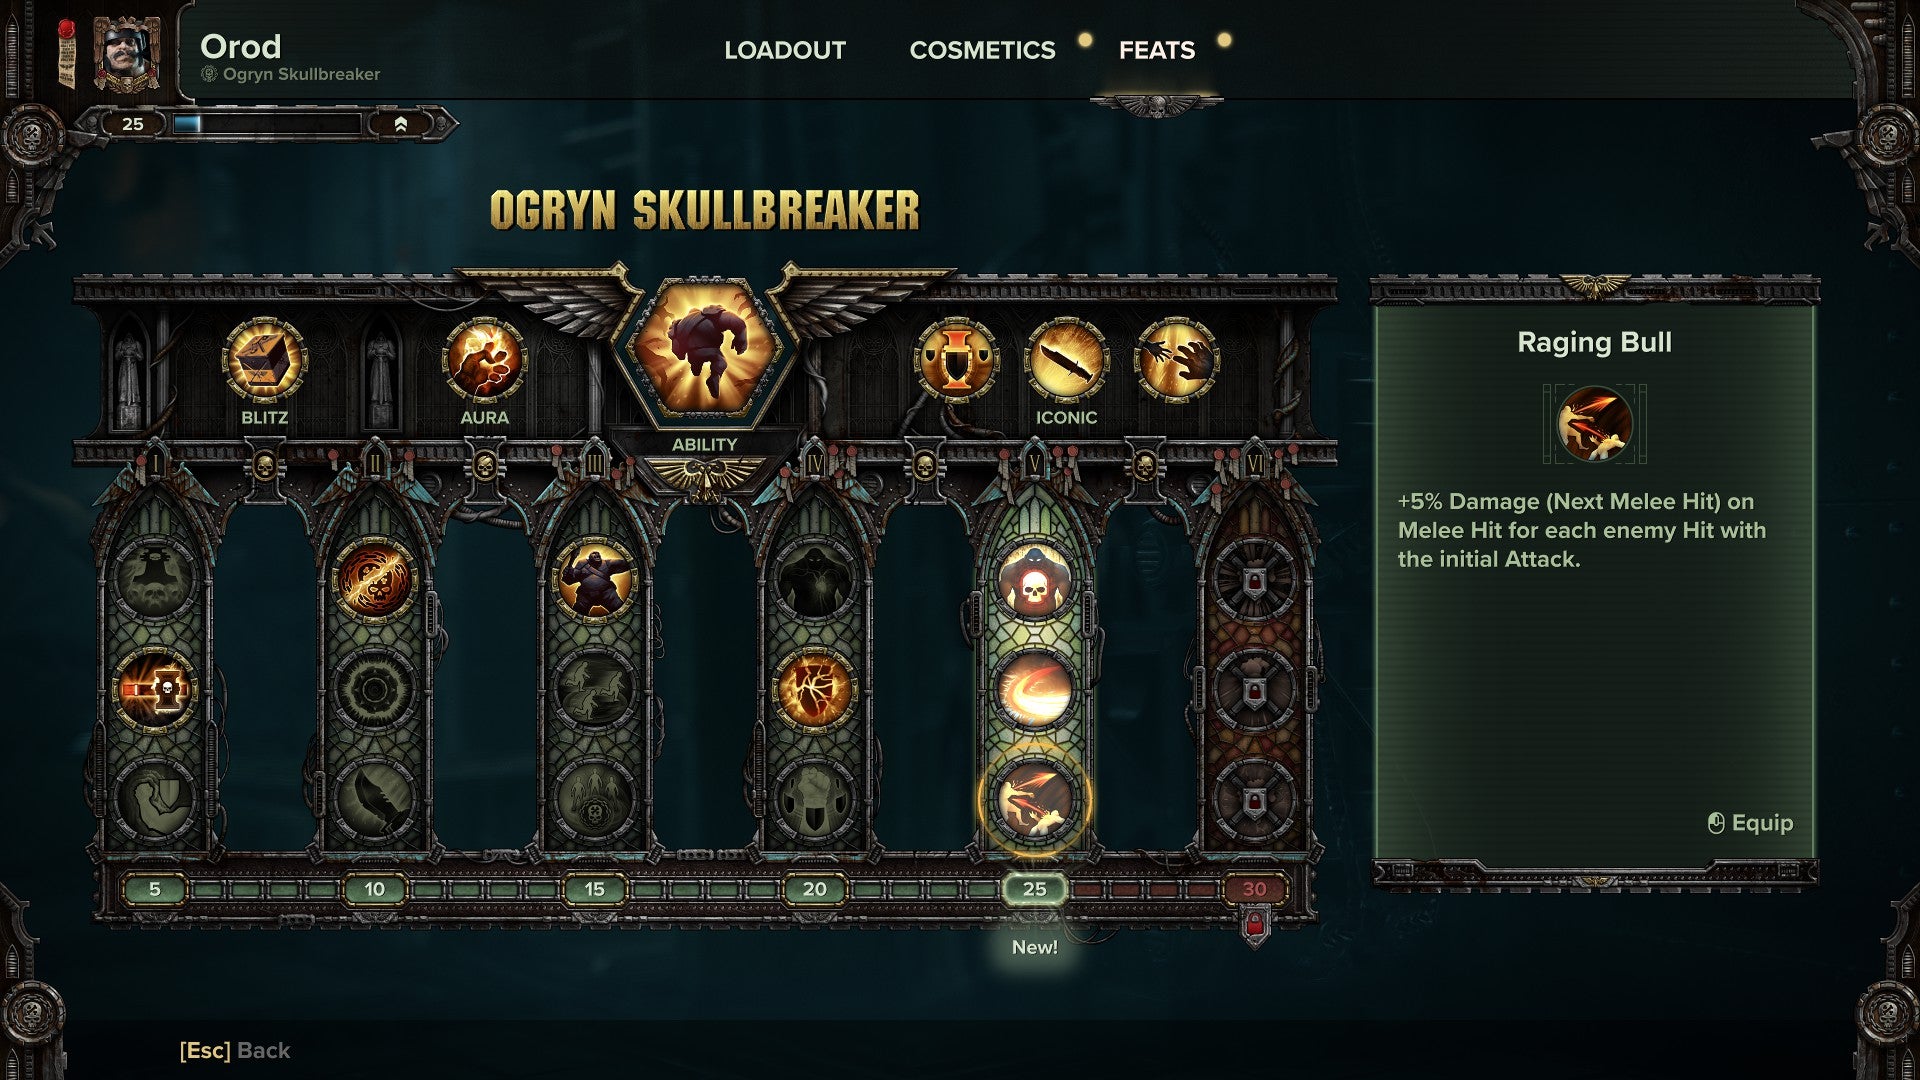 Darktide review - the Ogryn Feats screen showing your skill tree options